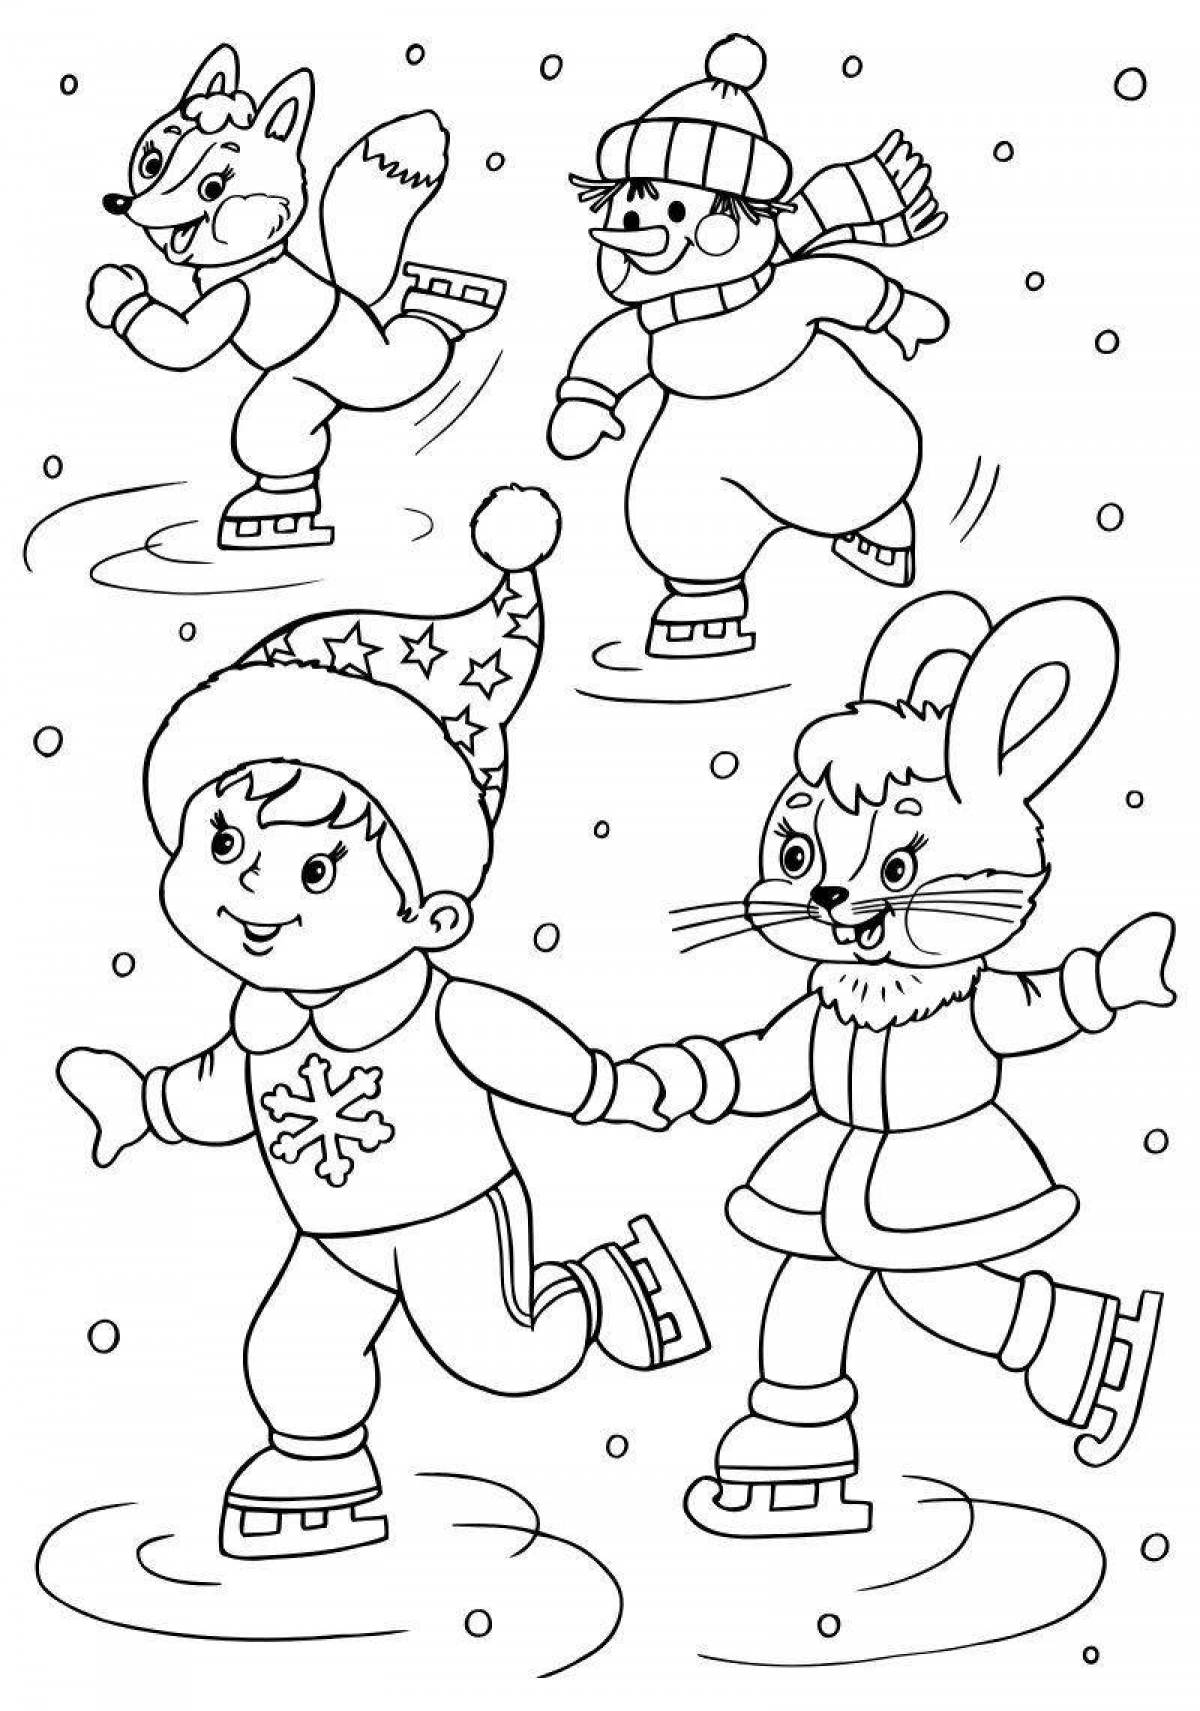 Fantastic winter coloring book for 4-5 year olds